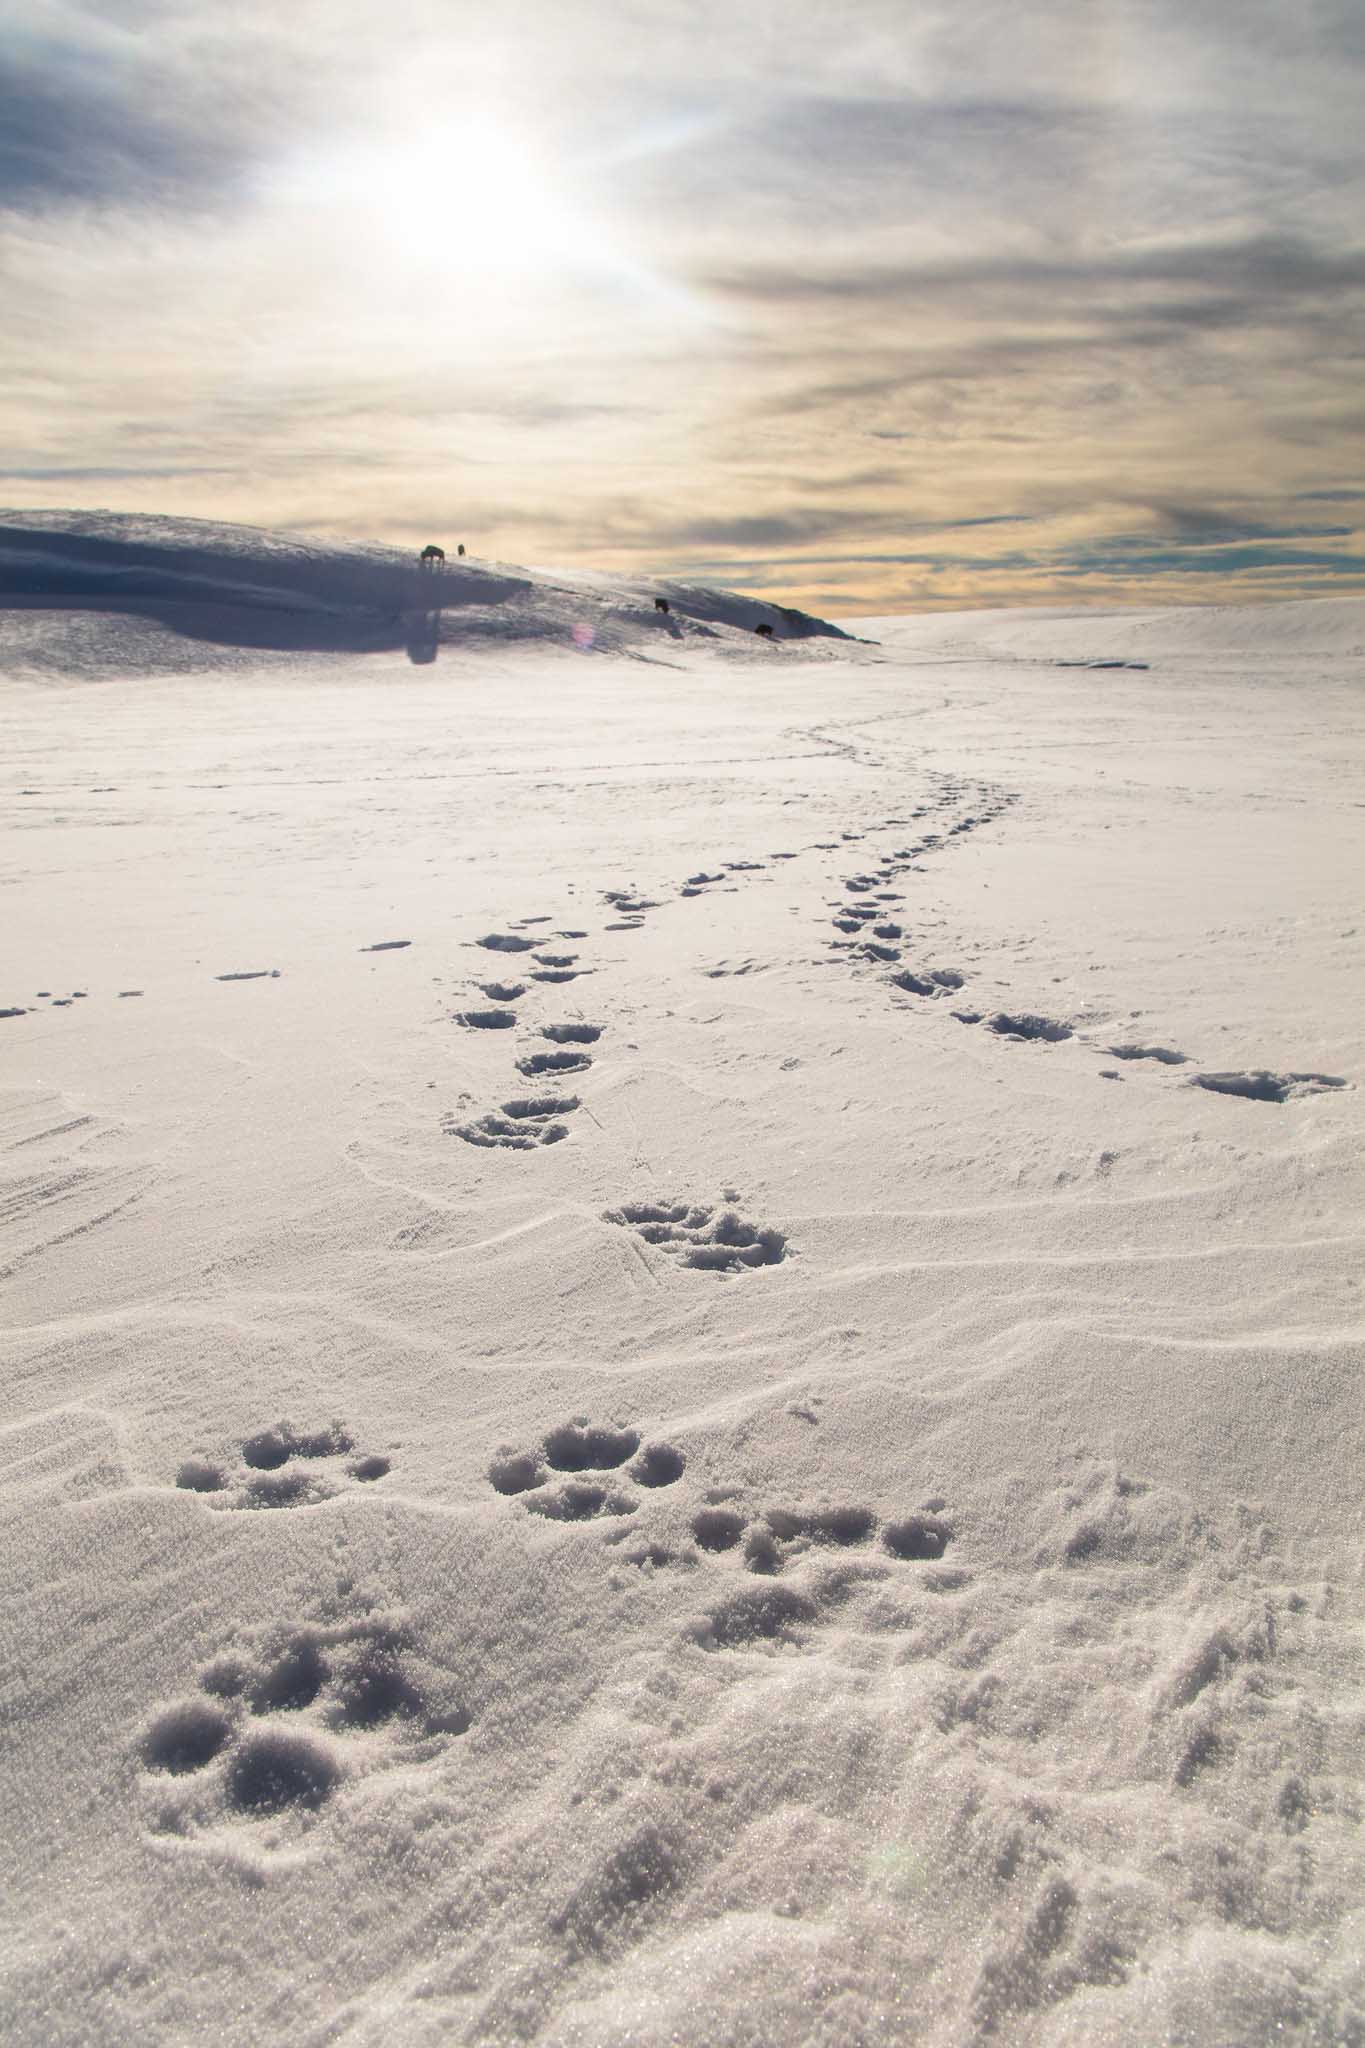 Wolf tracks at sunset in Hayden Valley, Yellowstone National Park - Image credit: NPS / Jacob W. Frank